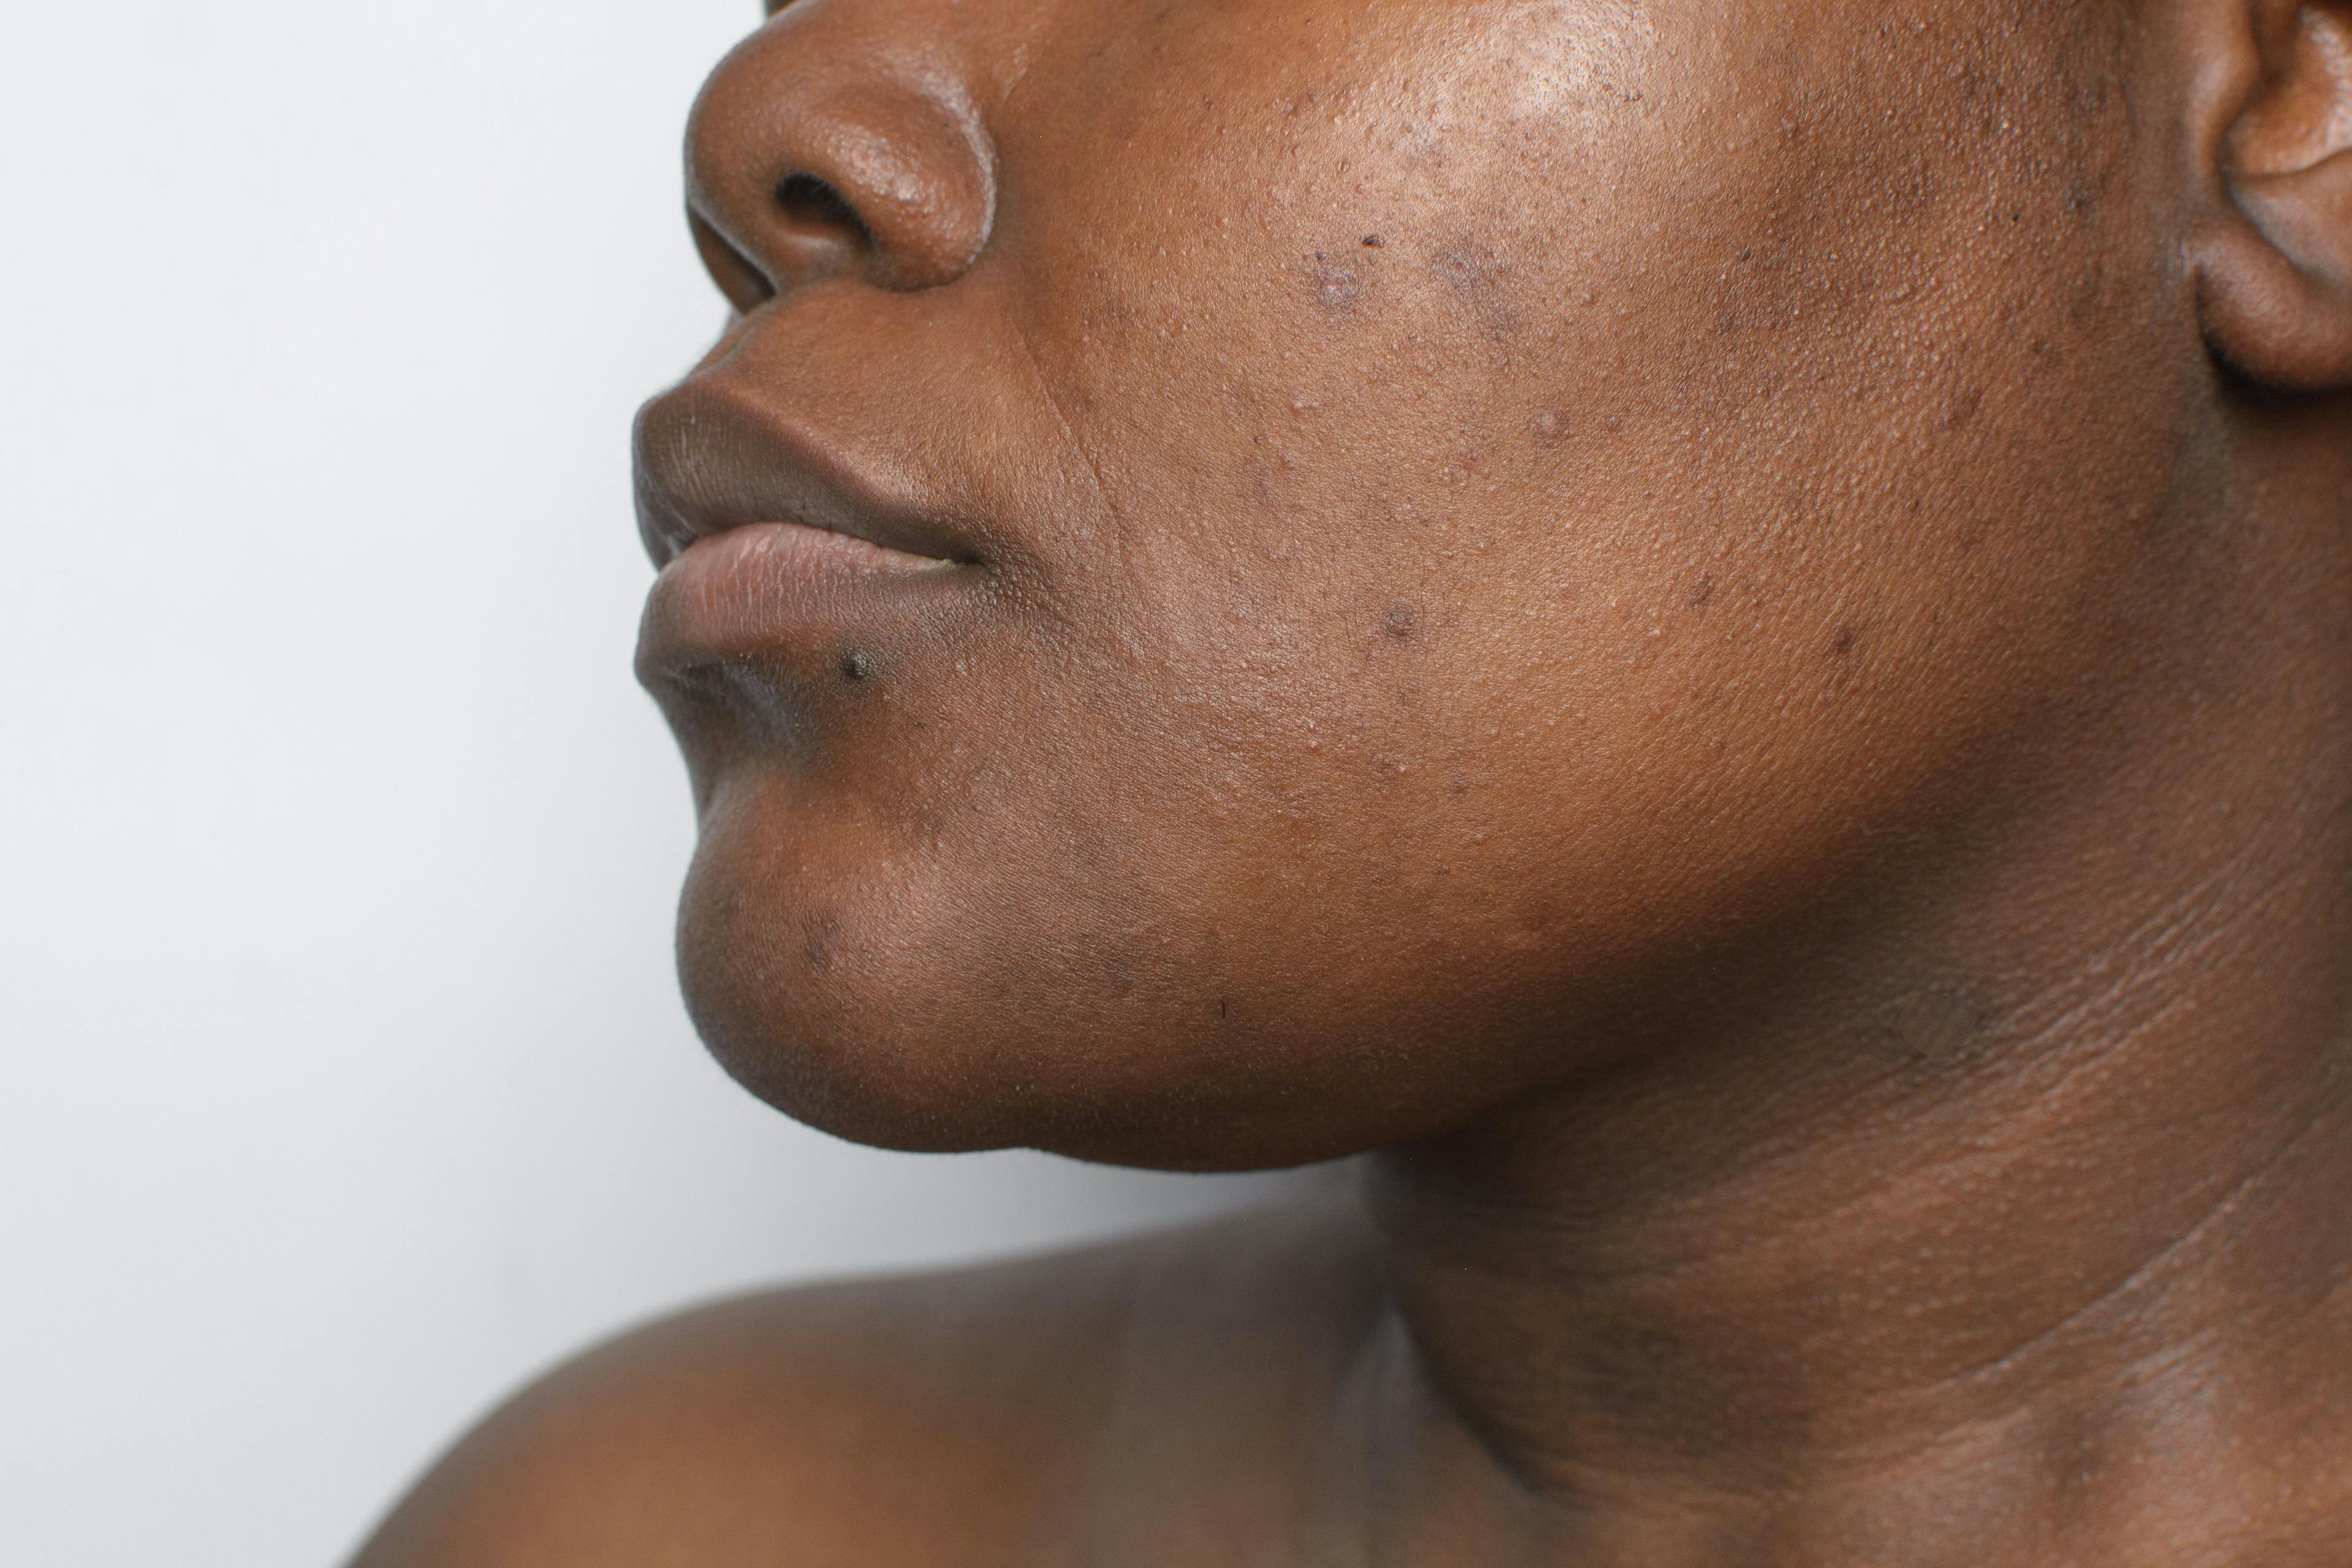 Trifarotene Yields Significant Improvements in Post-Inflammatory Hyperpigmentation